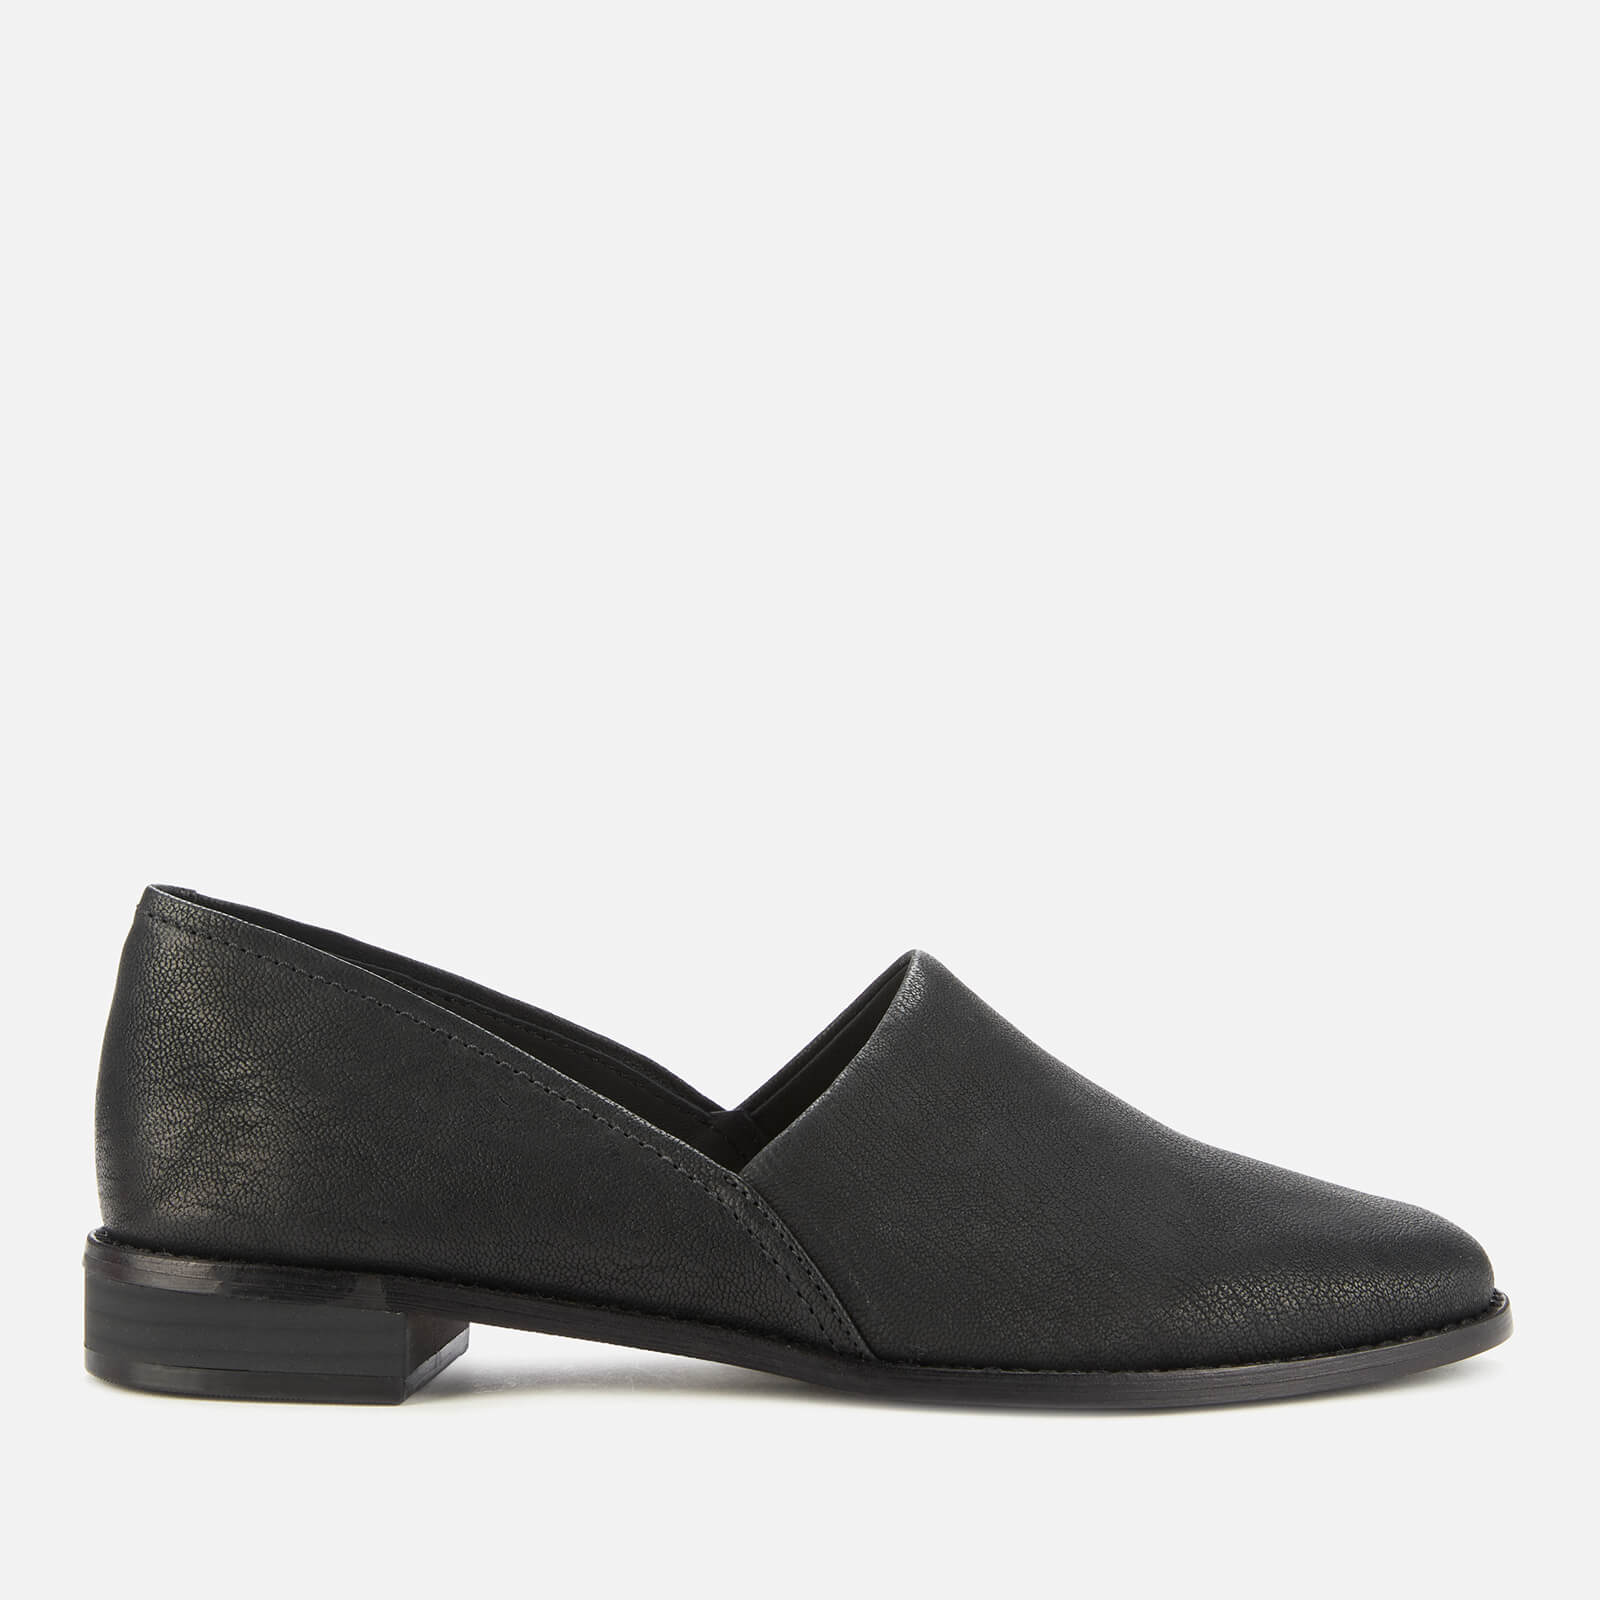 Clarks Women’s Pure Easy Leather Flats - Black